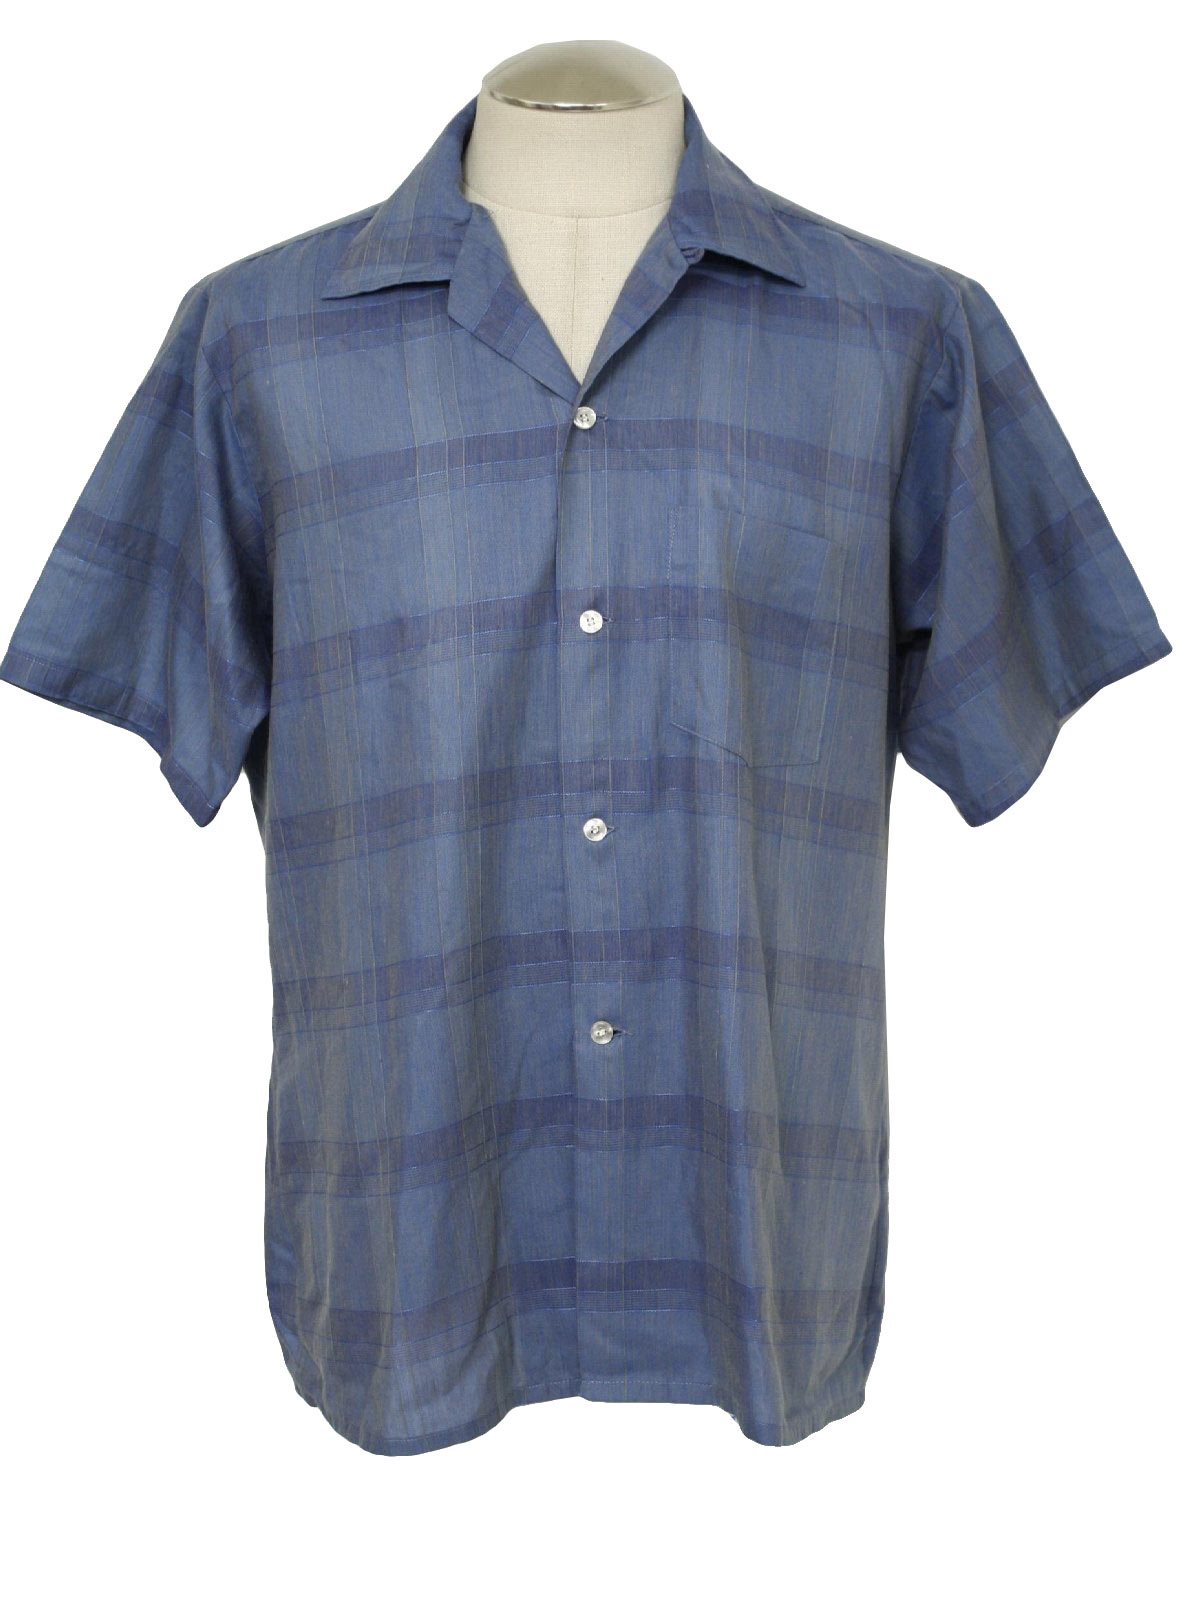 Retro 60s Shirt (Towncraft) : 60s -Towncraft- Mens blues, grey and gold ...